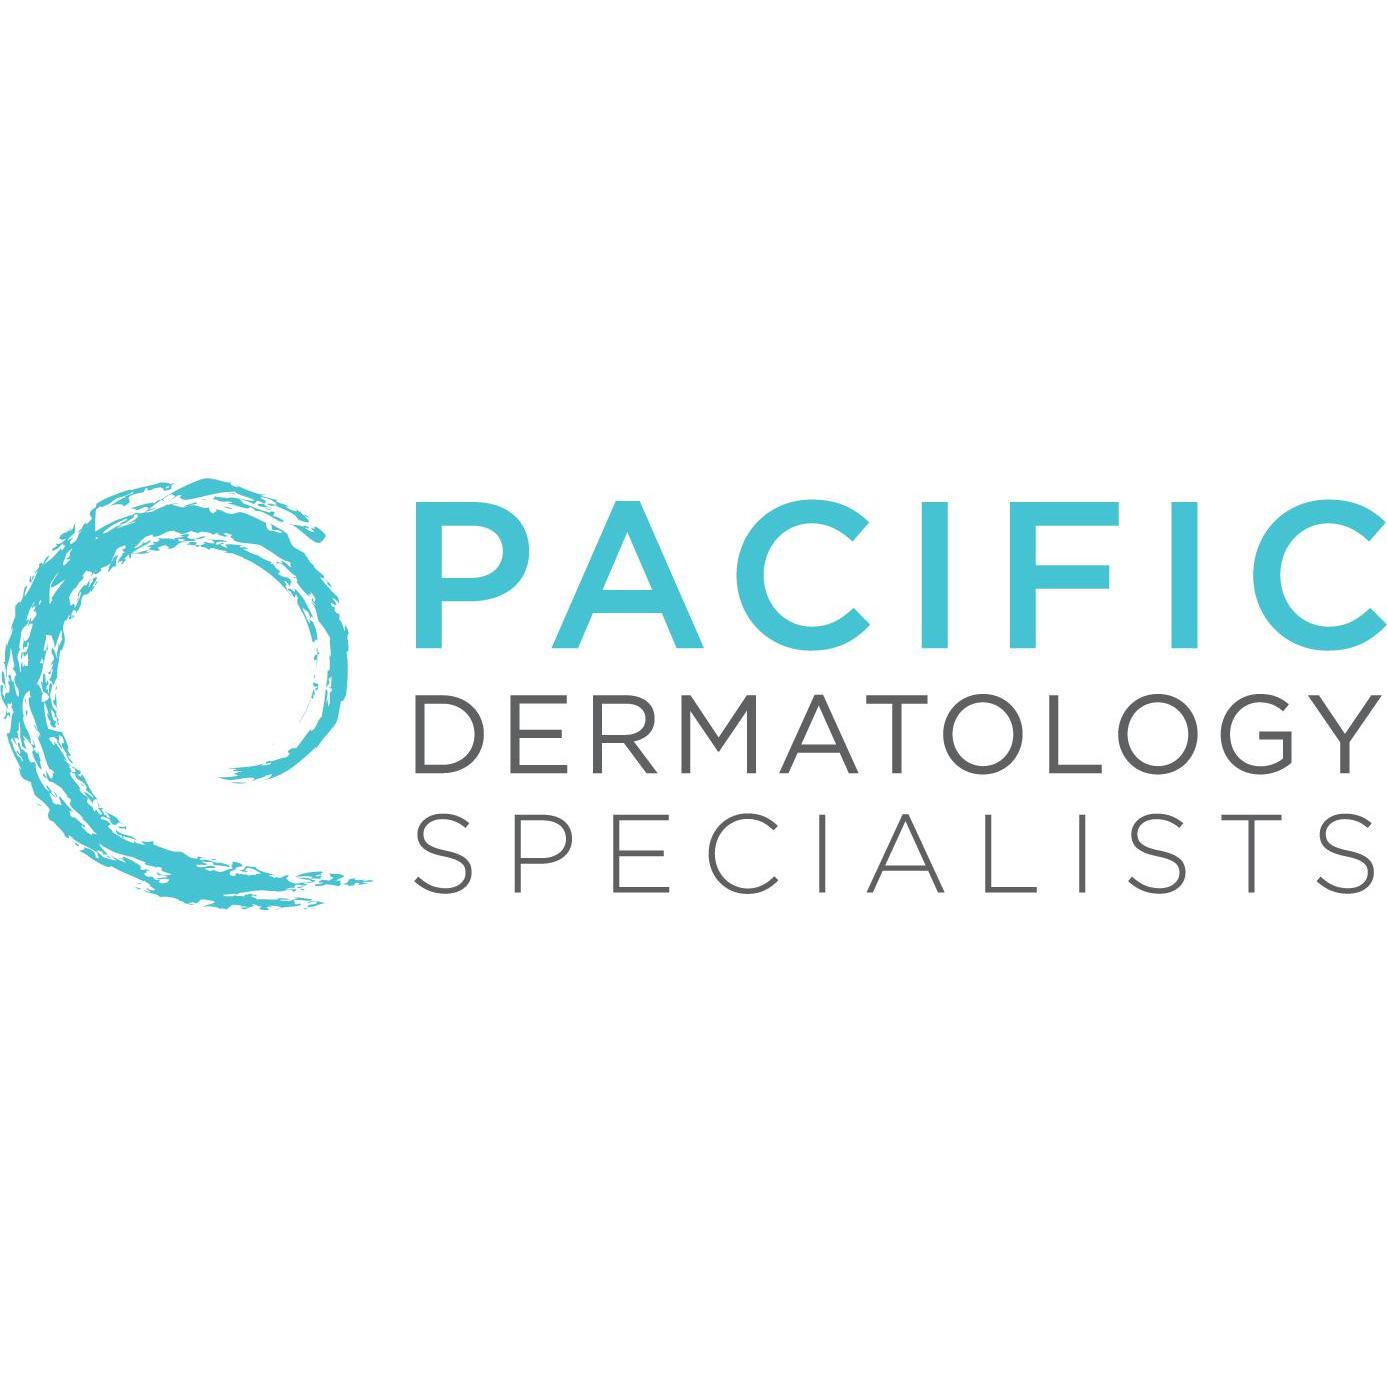 Pacific Dermatology Specialists - Long Beach, CA 90803 - (562)433-7700 | ShowMeLocal.com